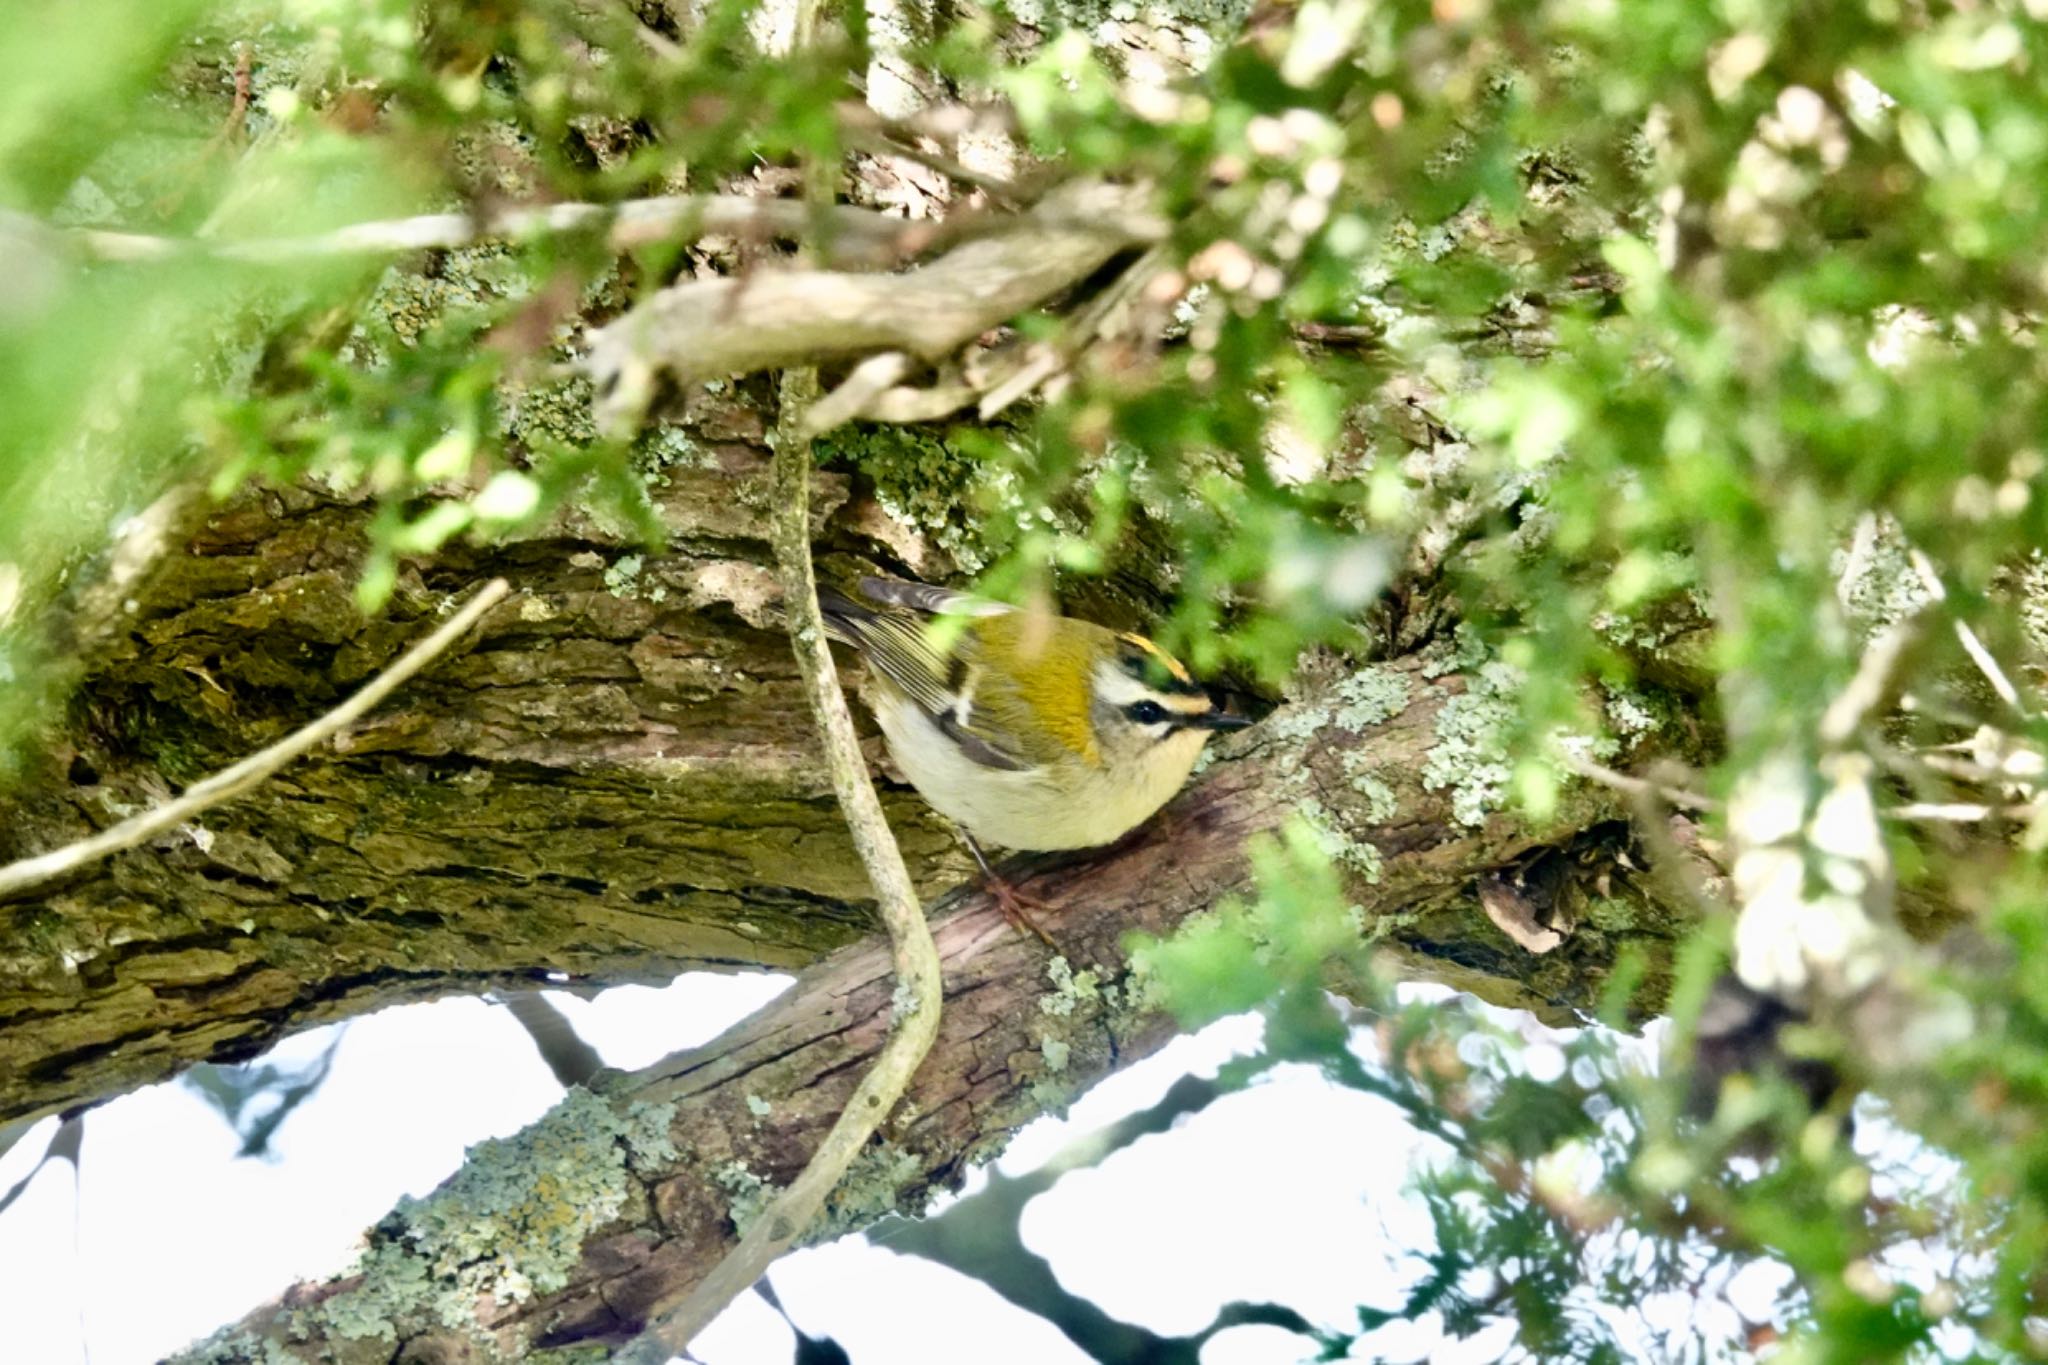 Photo of Common Firecrest at La Rochelle by のどか